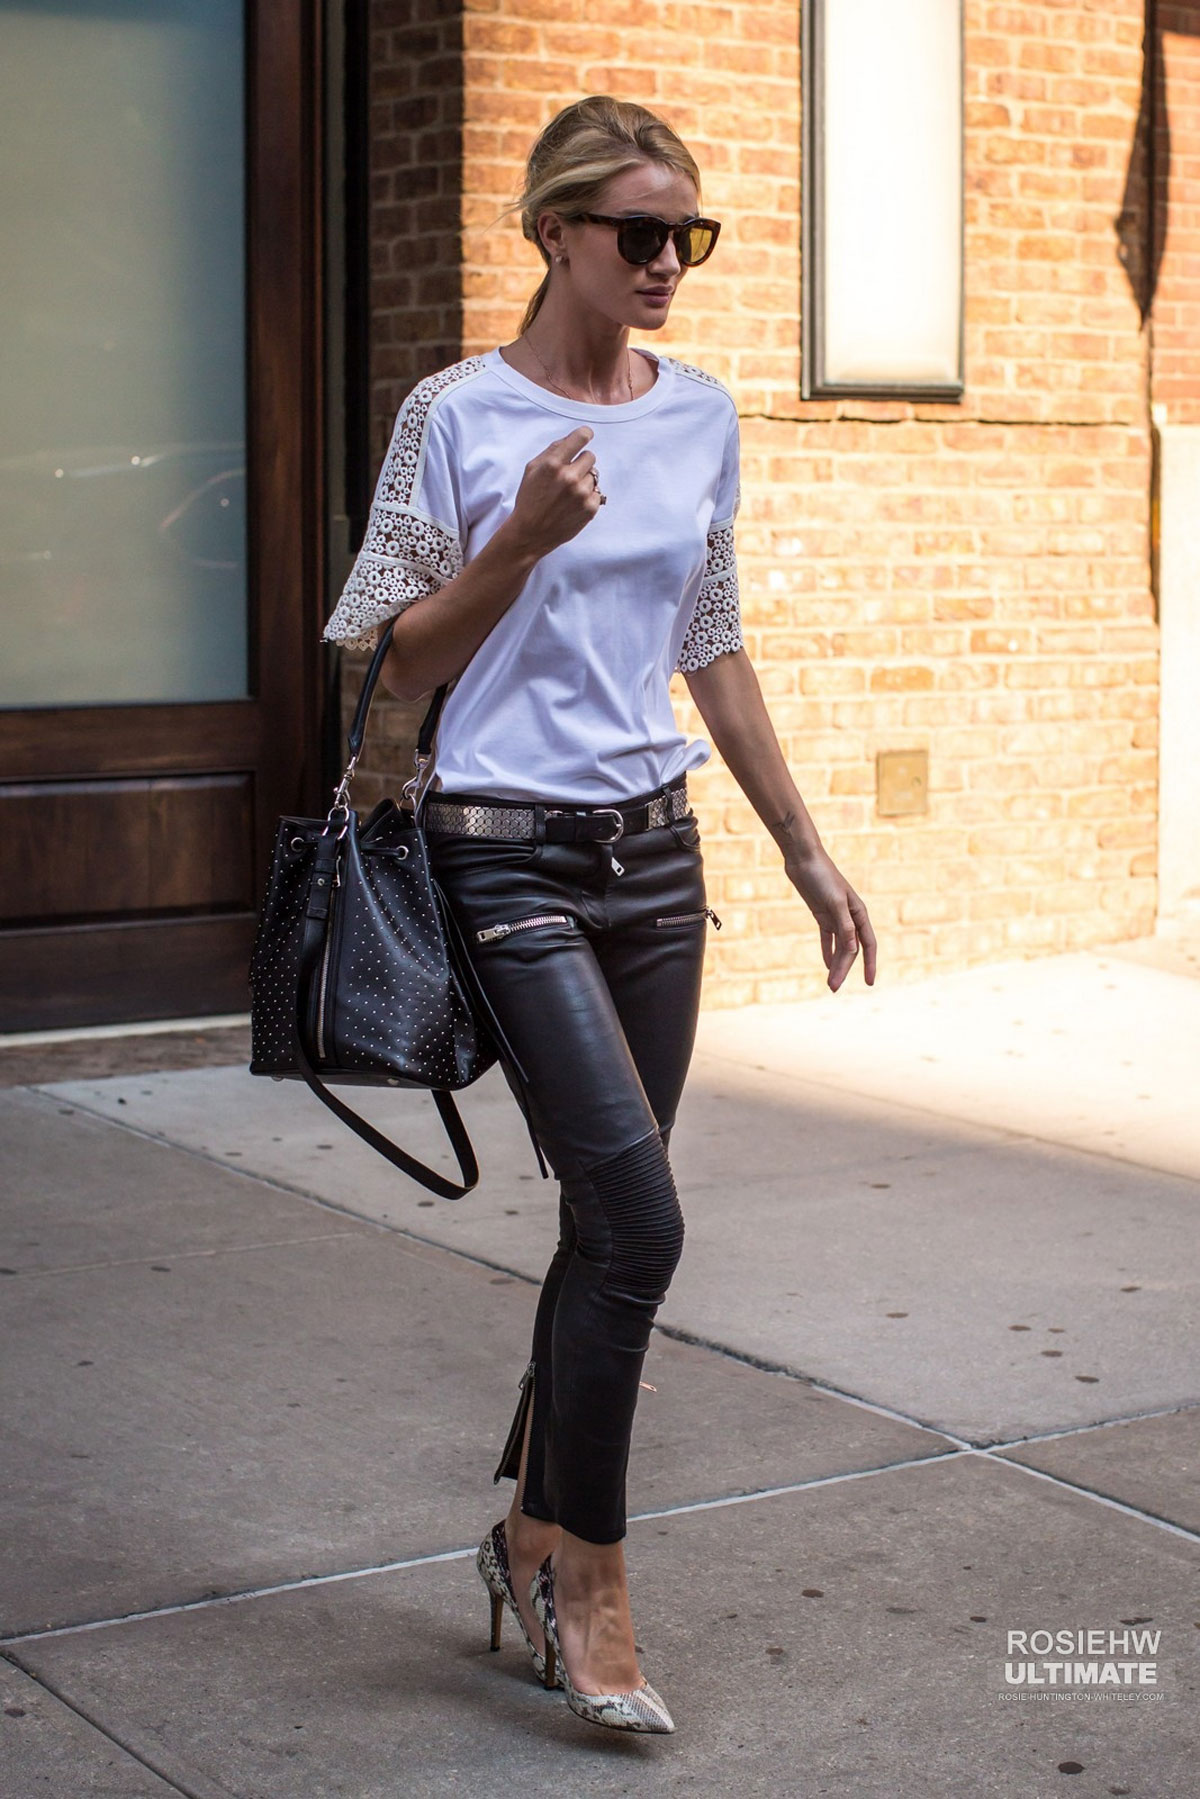 Rosie Huntington-Whiteley is seen stepping out in NYC